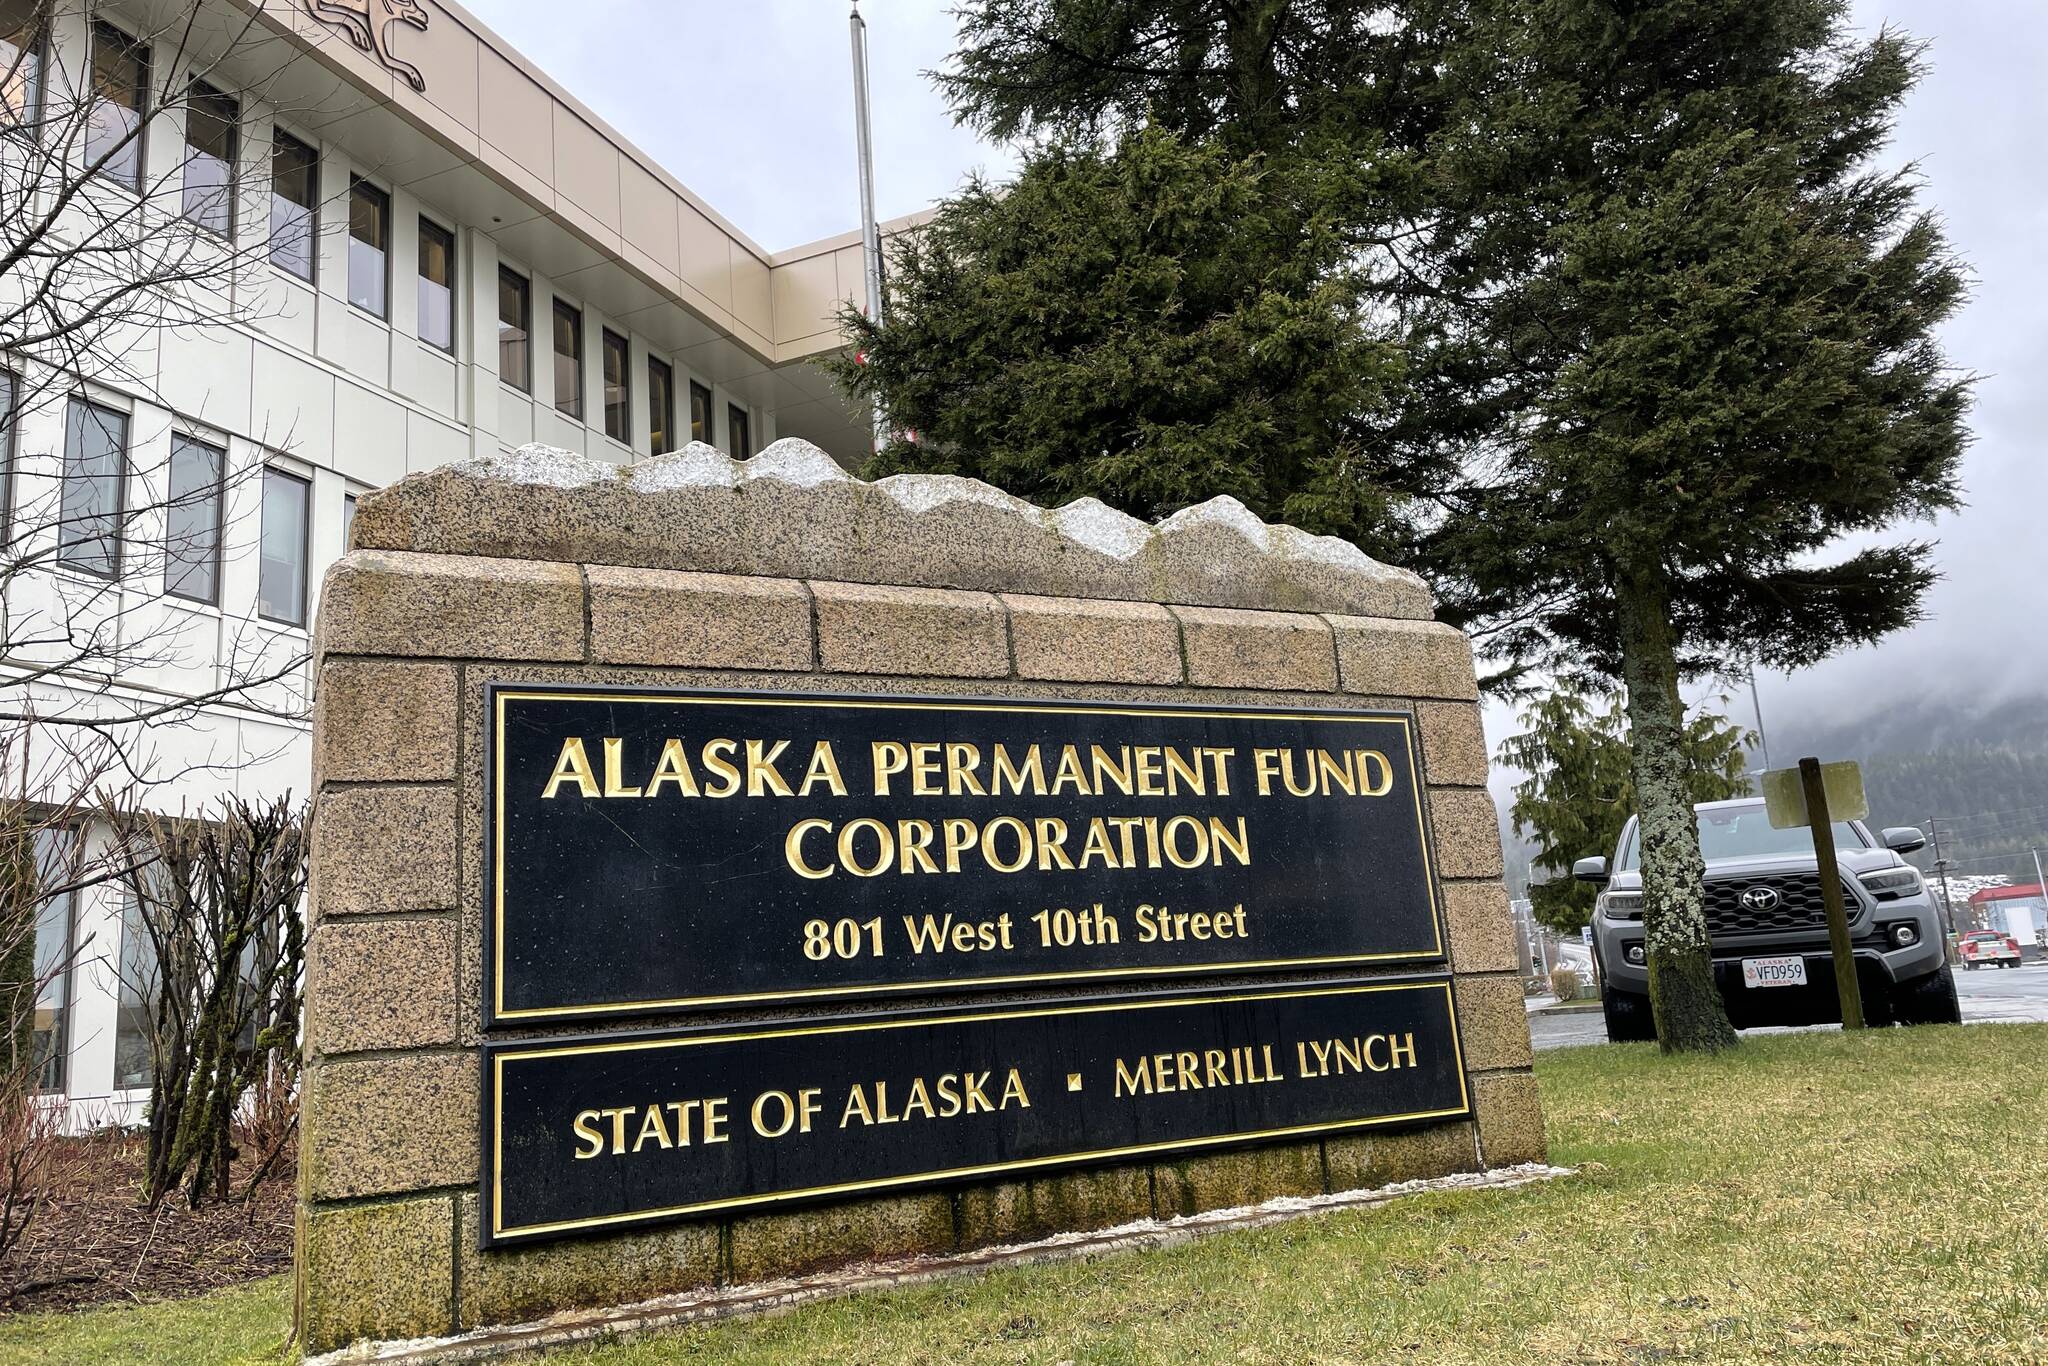 The deadline for the Alaska Permanent Fund dividend, which comes from the fund managed by the Alaska Permanent Fund Corporation, is March 31. (Michael S. Lockett / Juneau Empire)